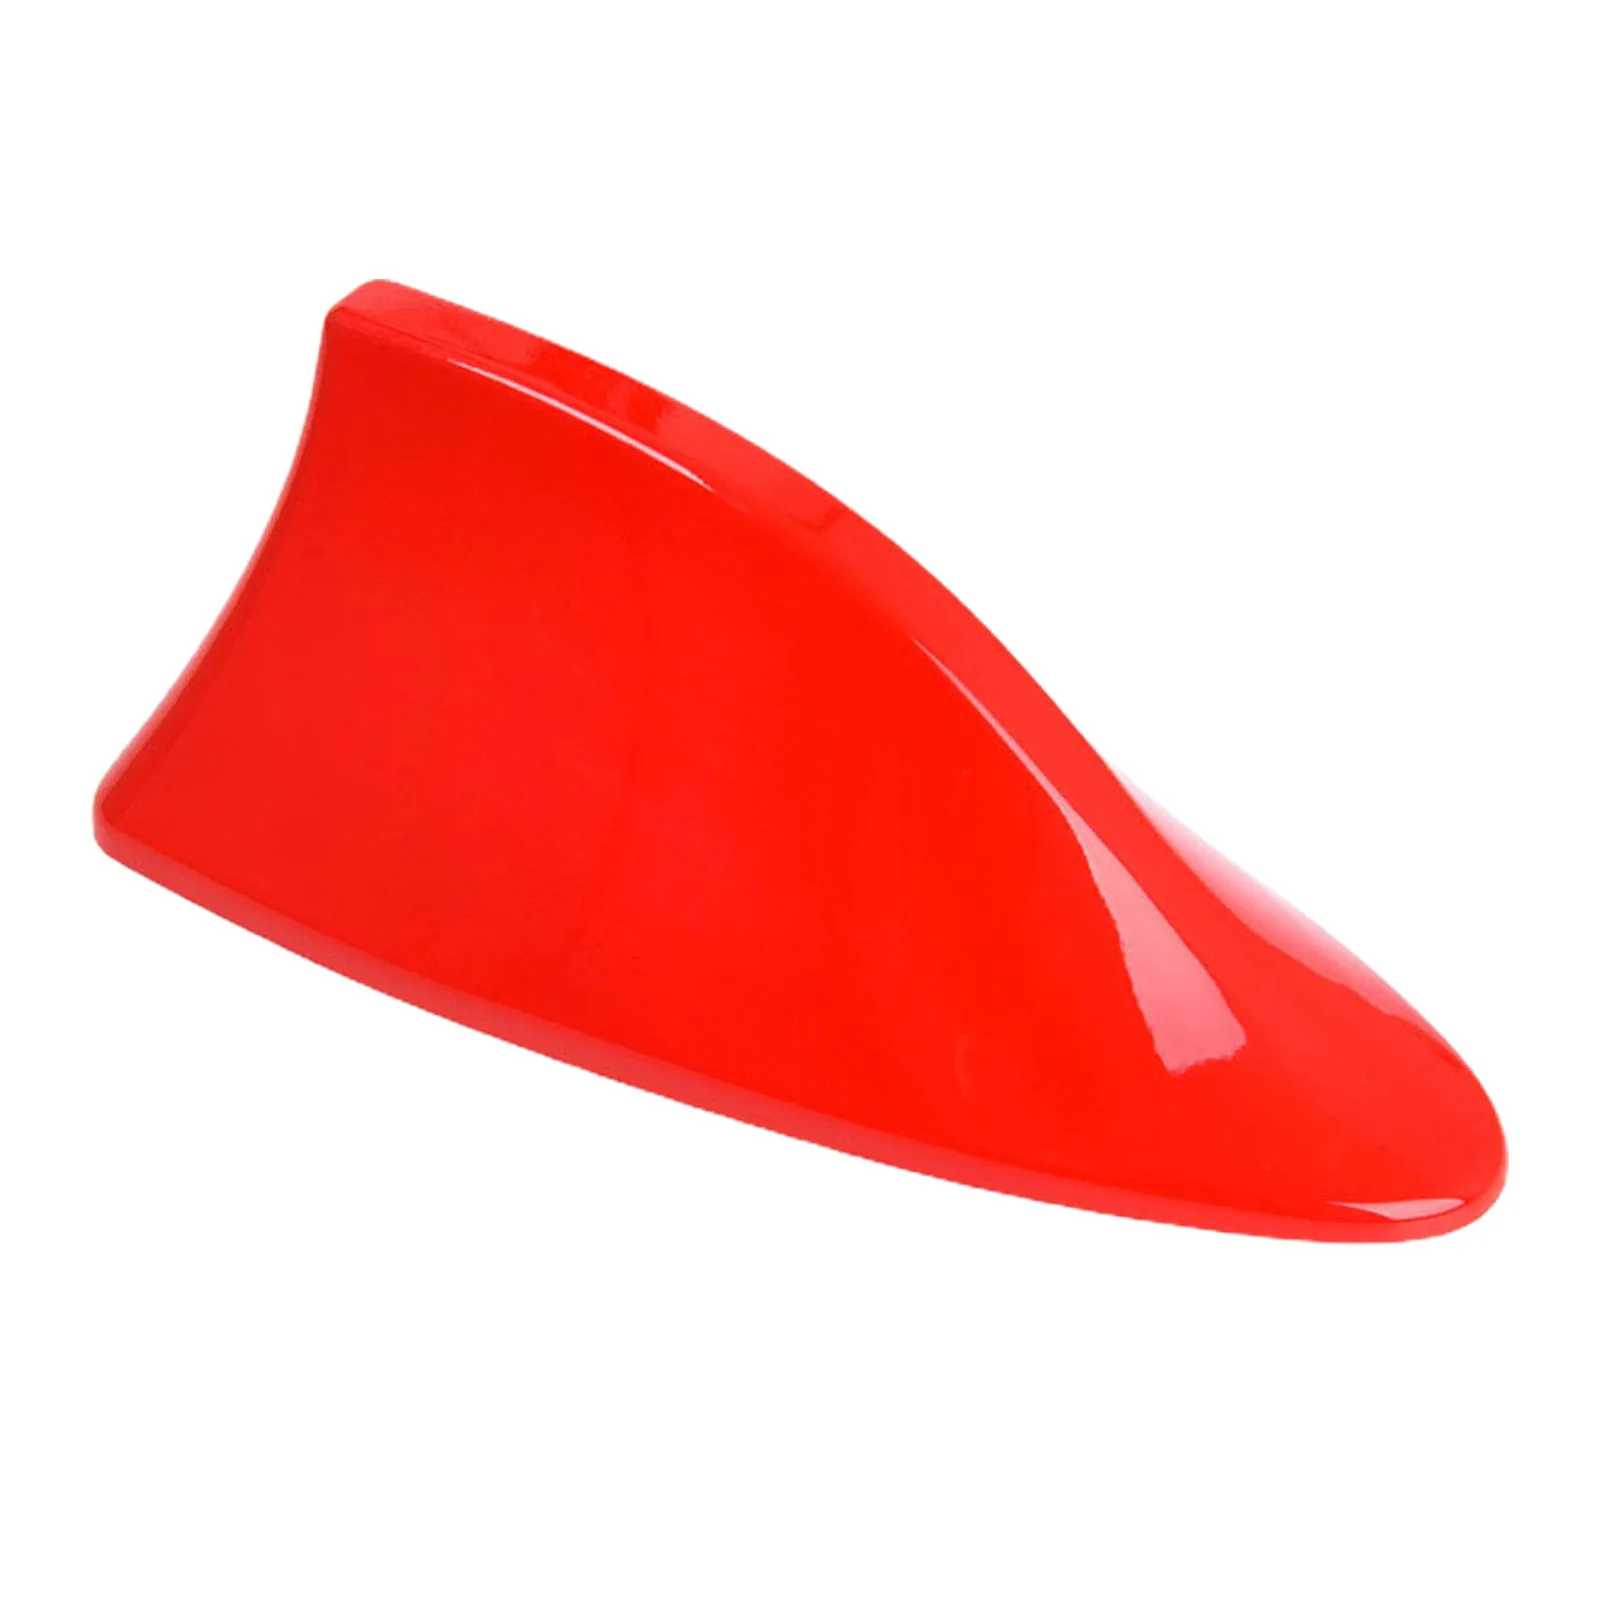 

Car Shark Fin Shape Antenna 1pcs New Waterproof Auto Antistatic Dummy Aerial Roof Hot Selling Sweetie